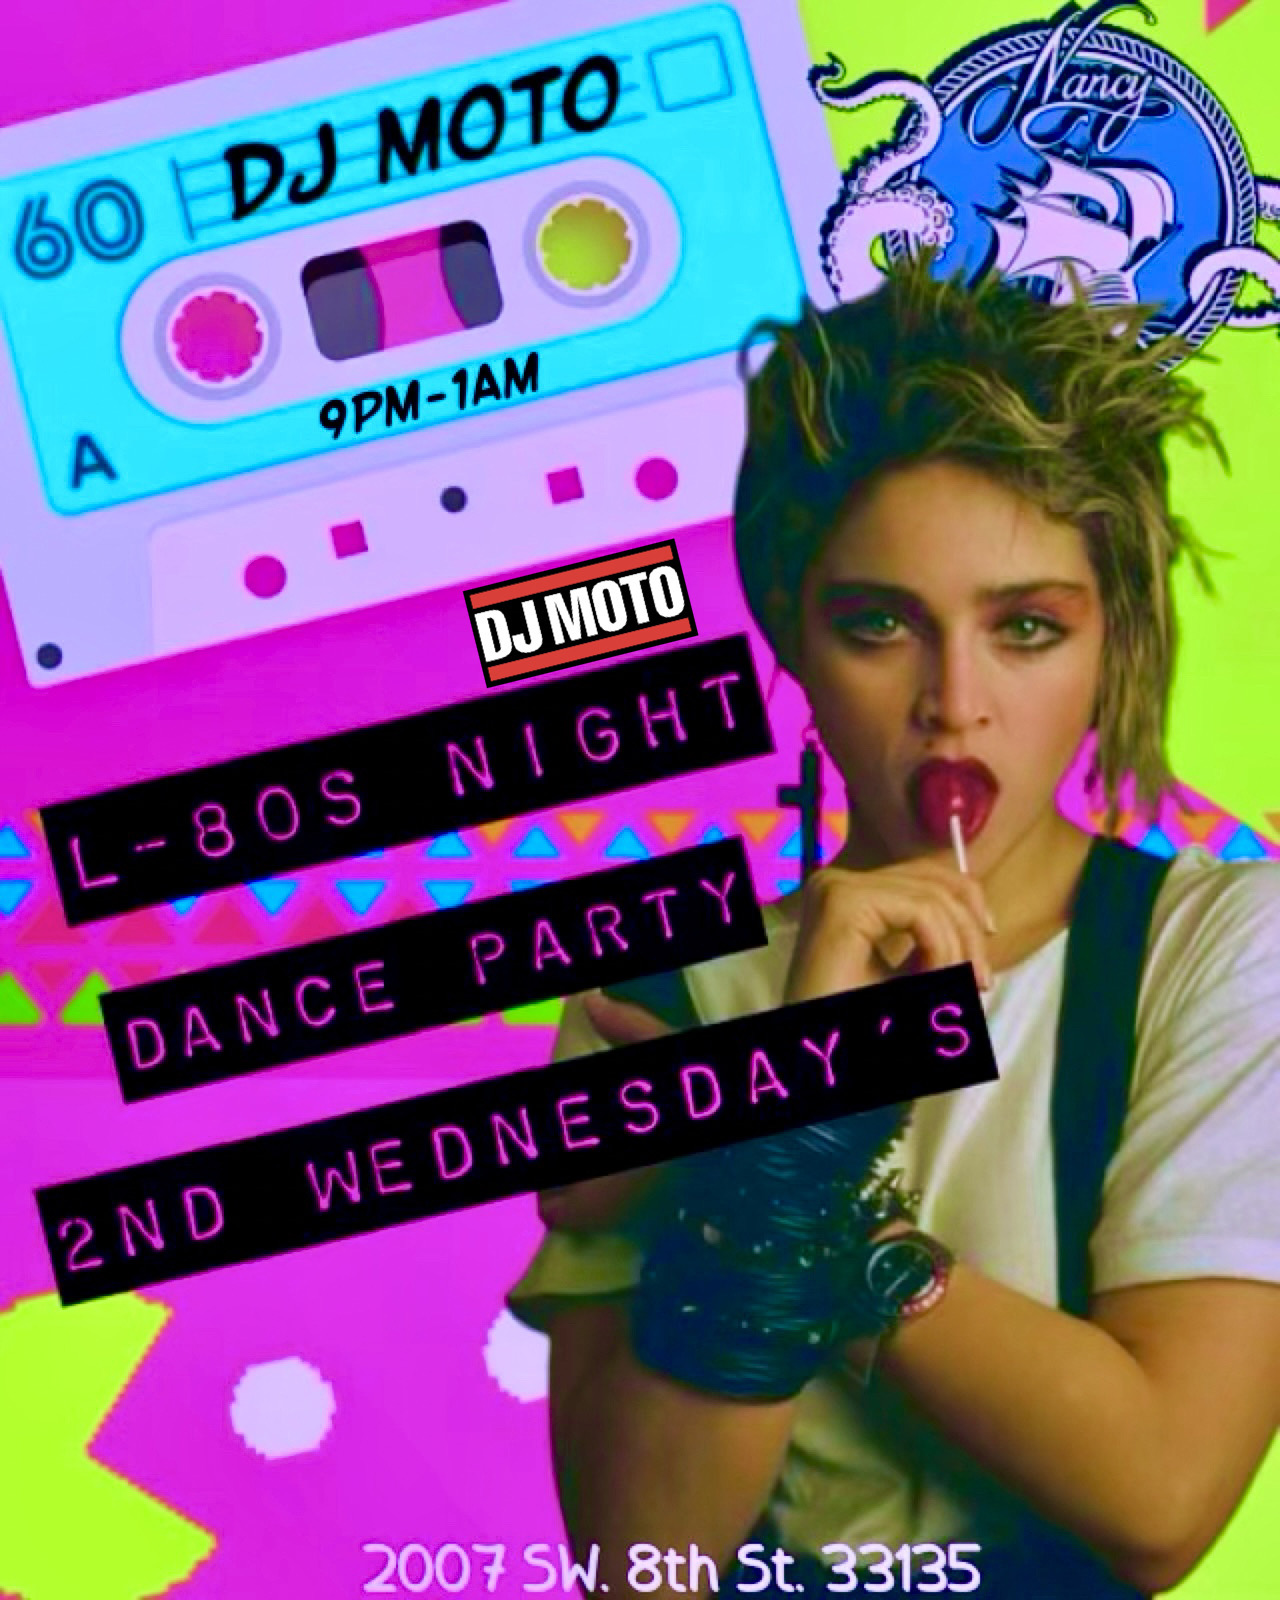 L80’s Night at Bar Nancy - 2nd Wednesday of the month